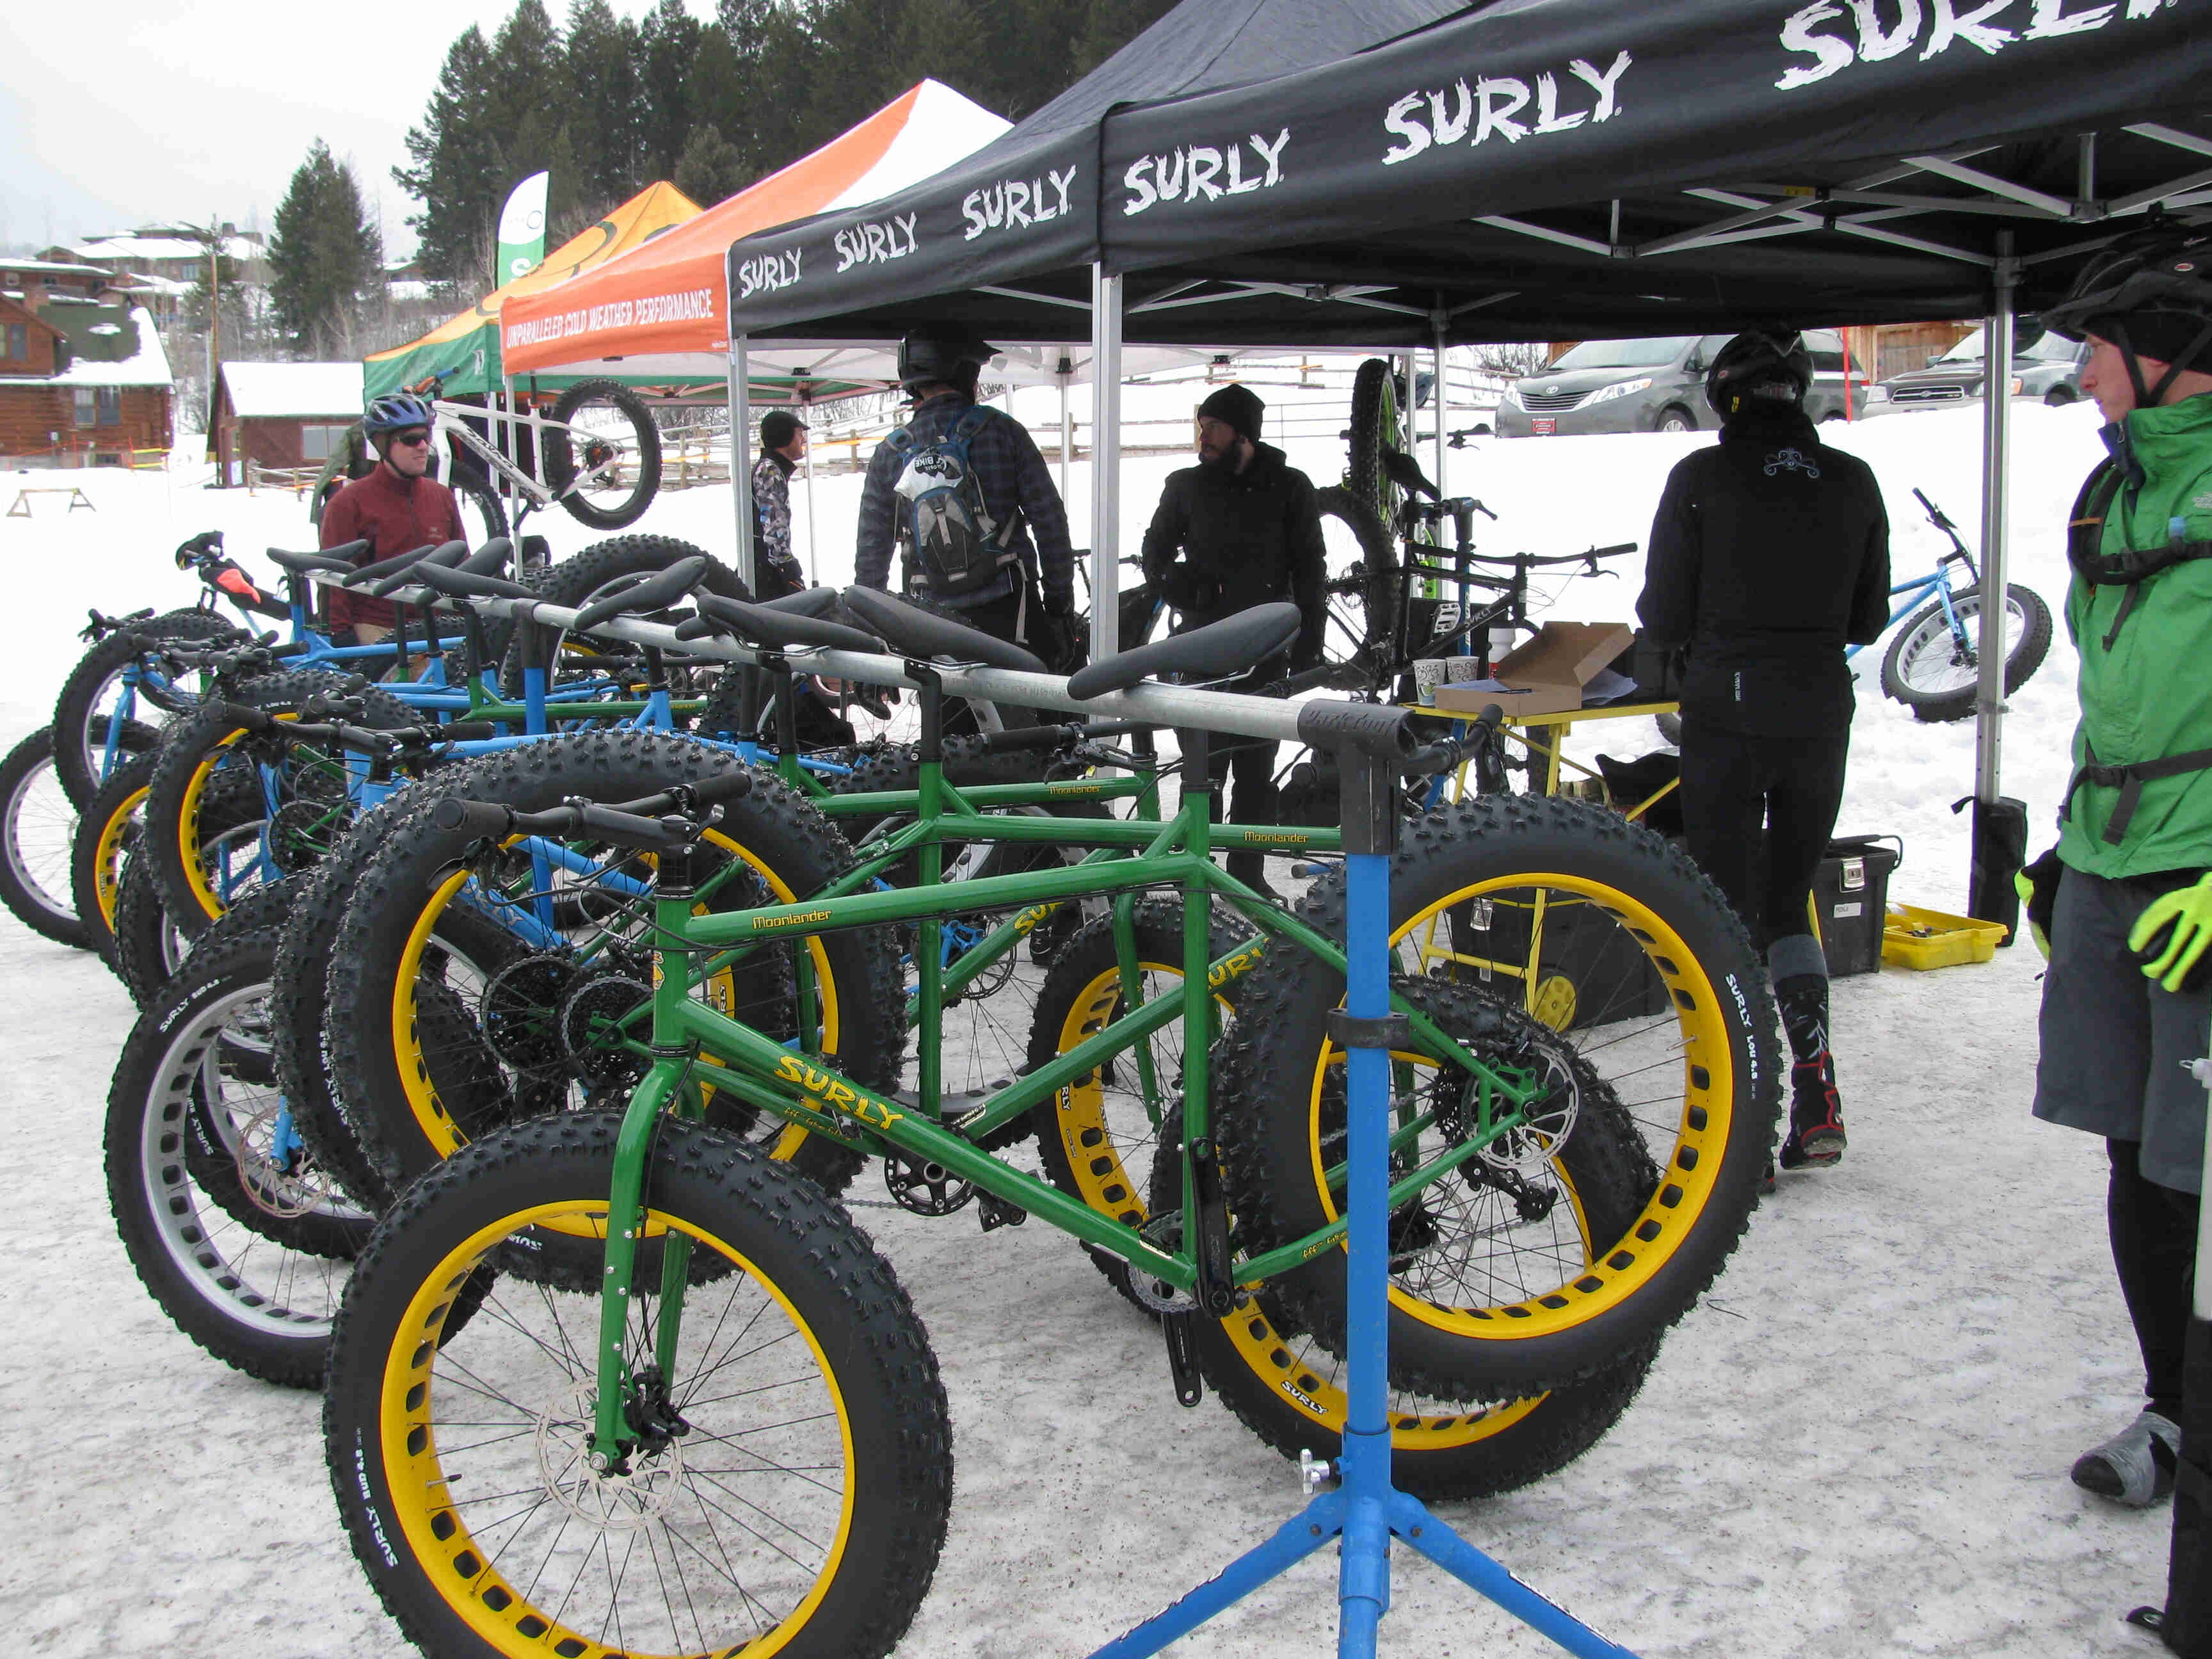 Side view of a rack, full of Surly fat bikes in the snow, with people standing behind, under a row of canopies